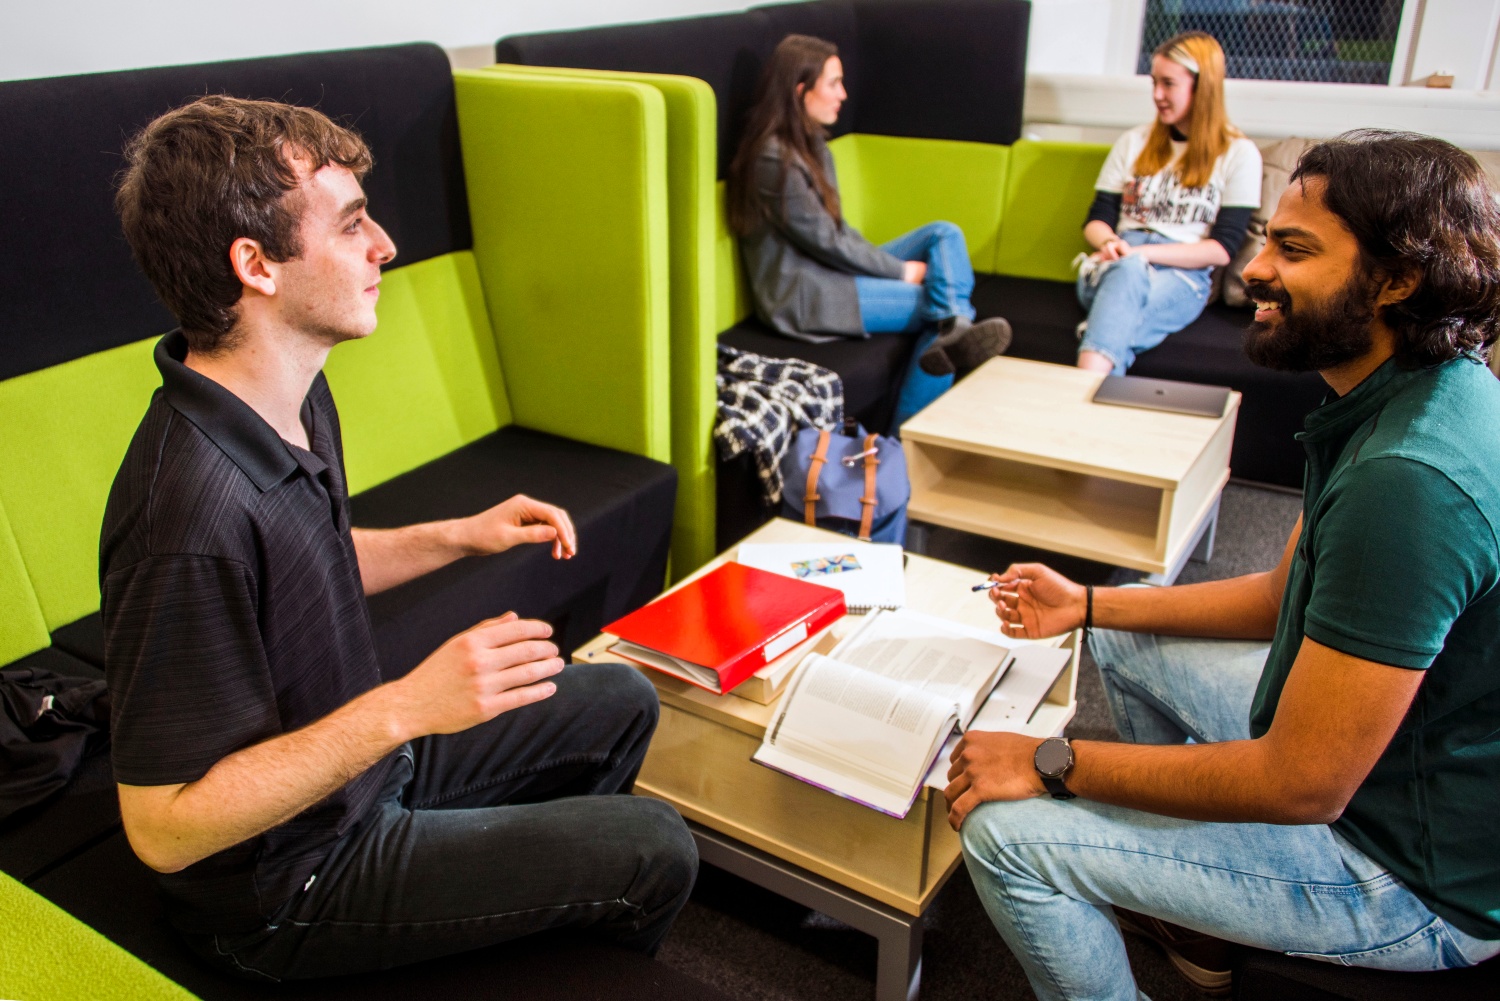 Students chatting in a social space on the Abertay campus.